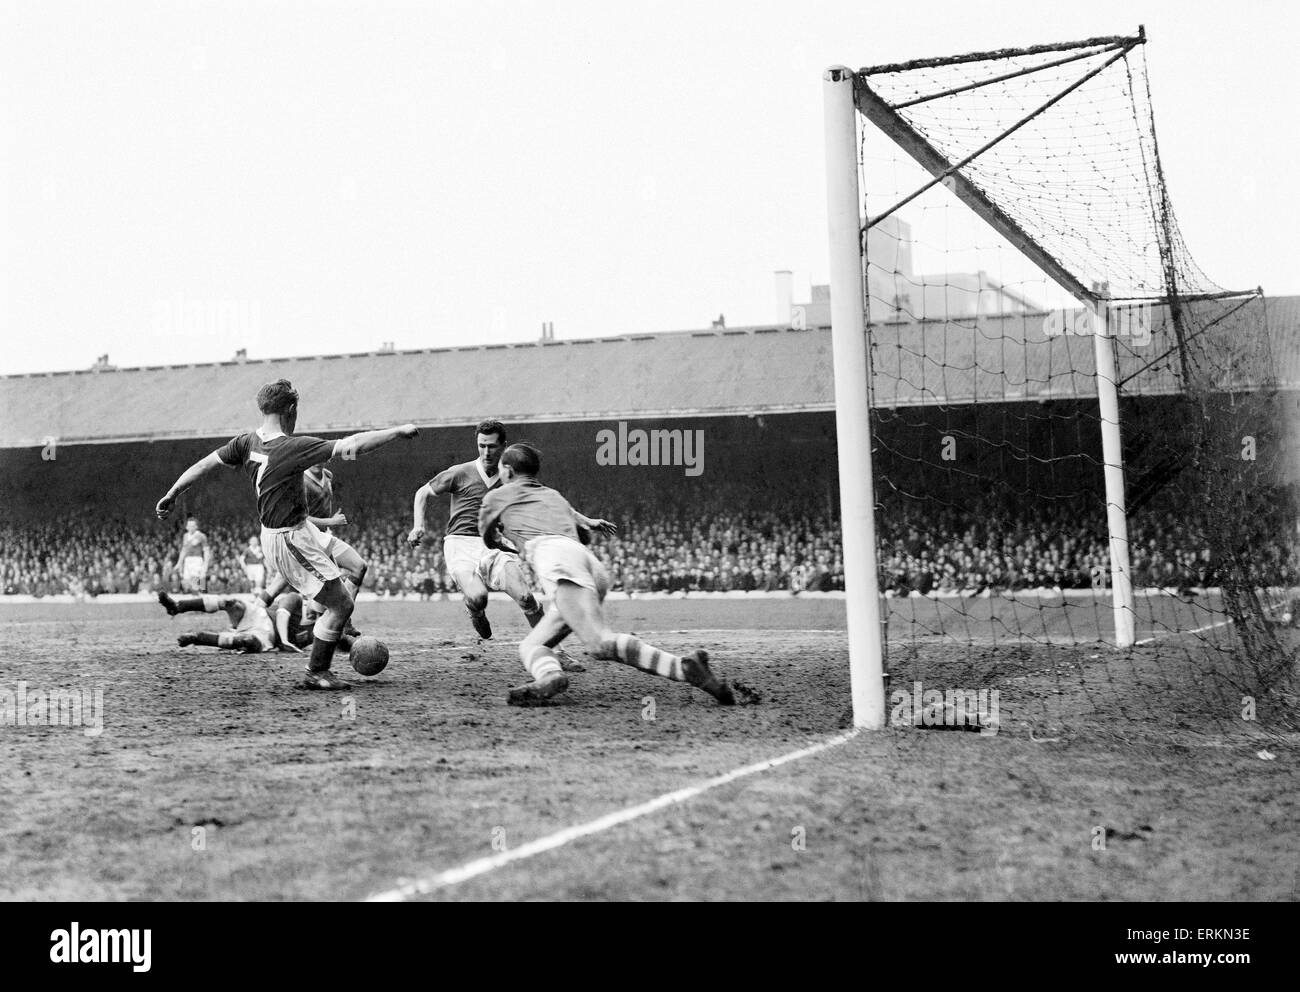 FA Cup Fifth Round Second Replay match. Birmingham City 0 v Nottingham Forest 5. Roy Dwight scores Forest's fourth goal. 23rd February 1959. Stock Photo